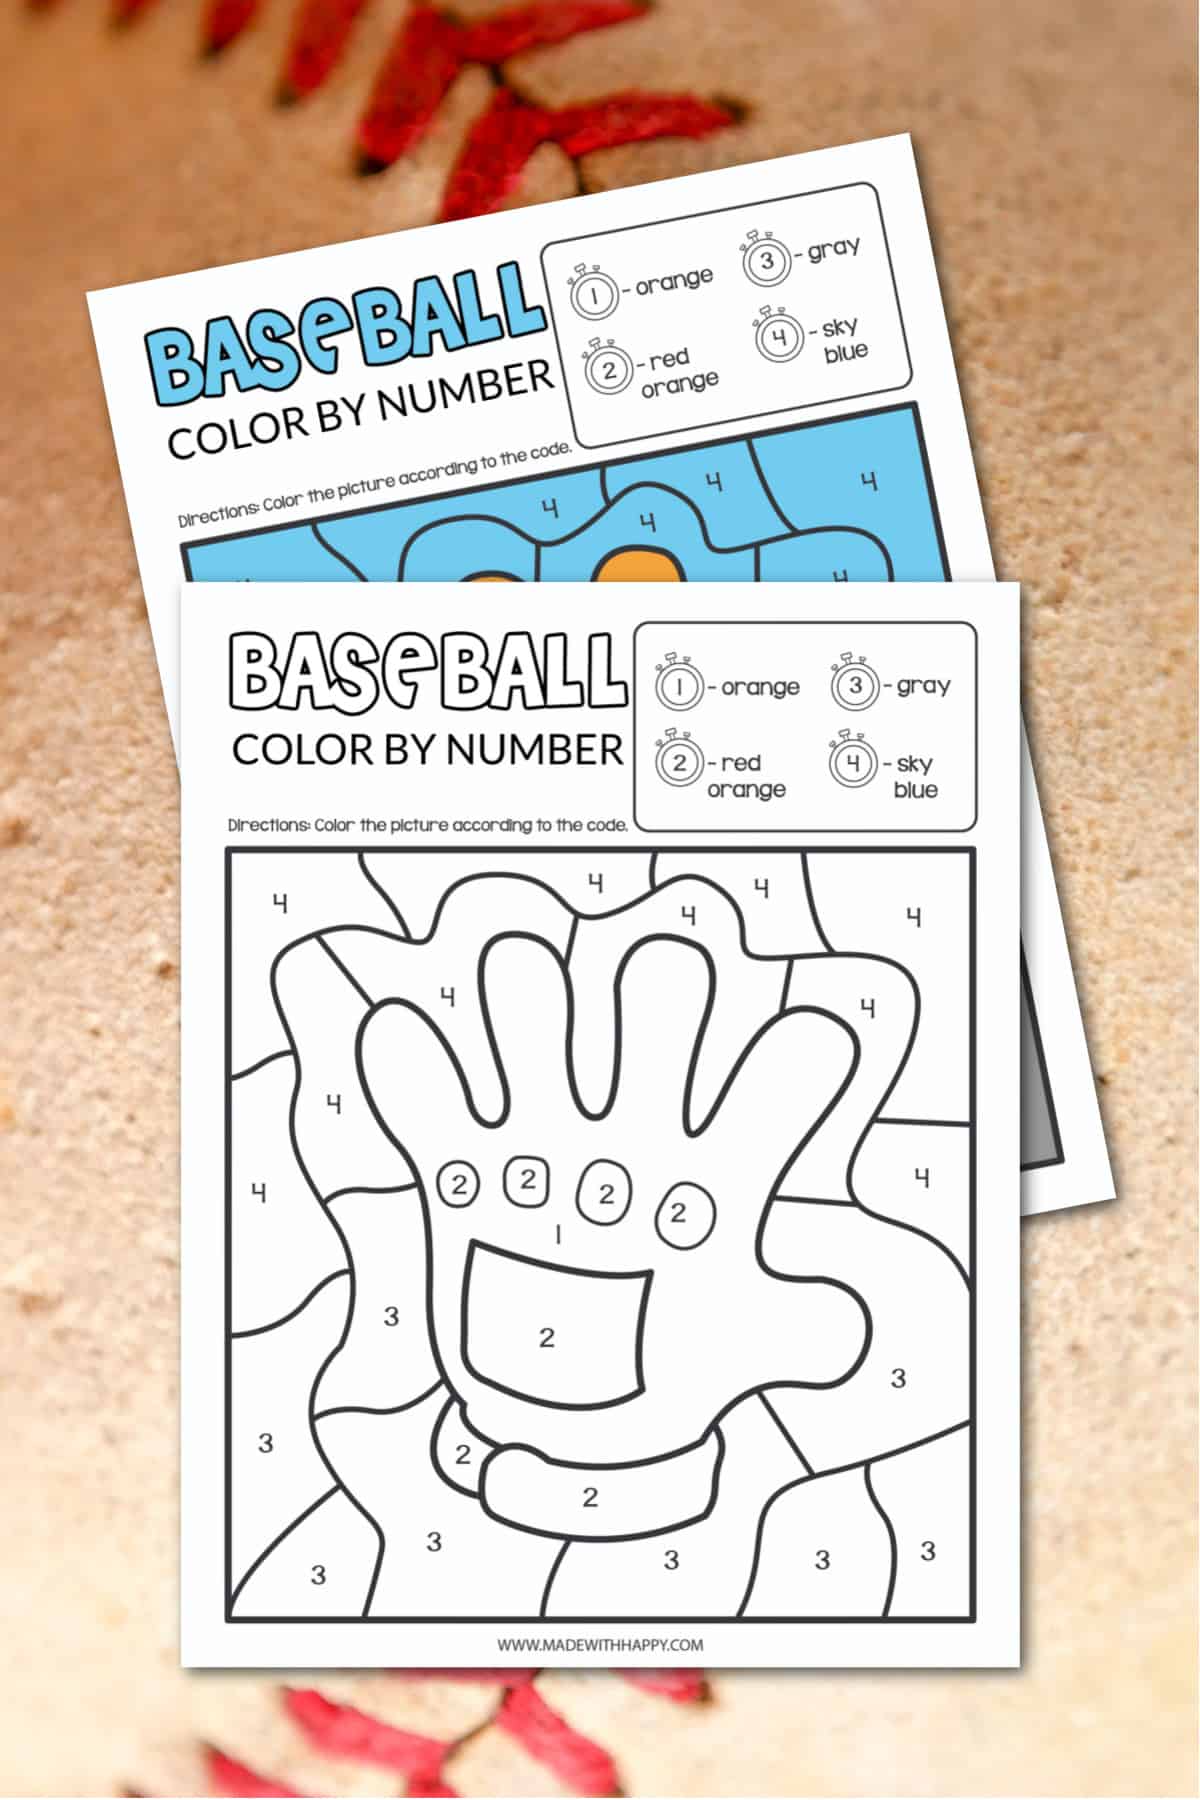 FREE Baseball Color By Number Printable - Made with HAPPY